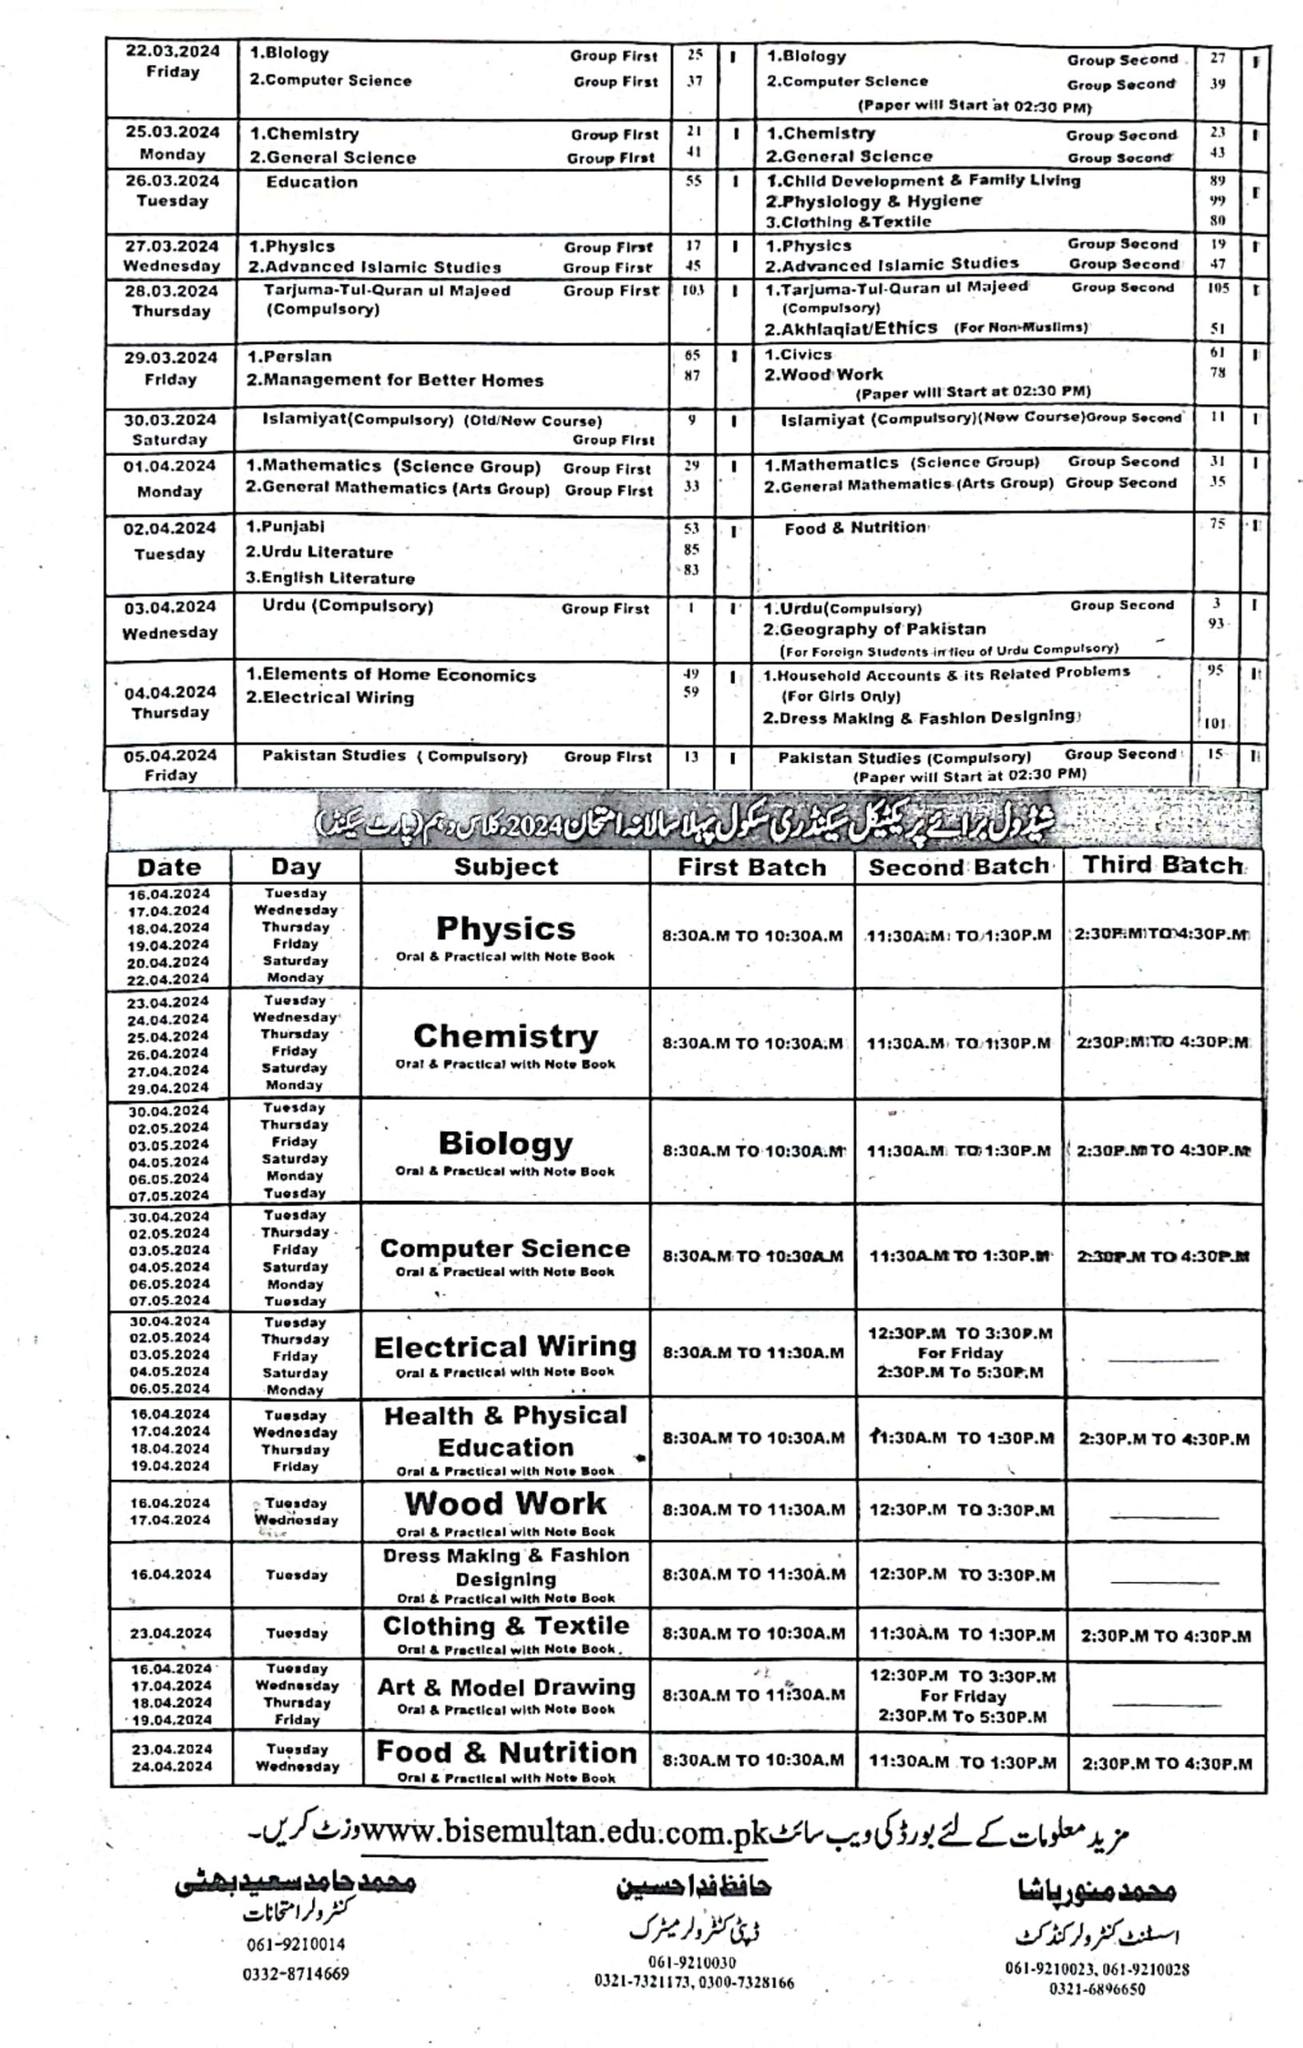 Practical Date sheet of Bise Multan SSC Part-I& II annual Examinations.